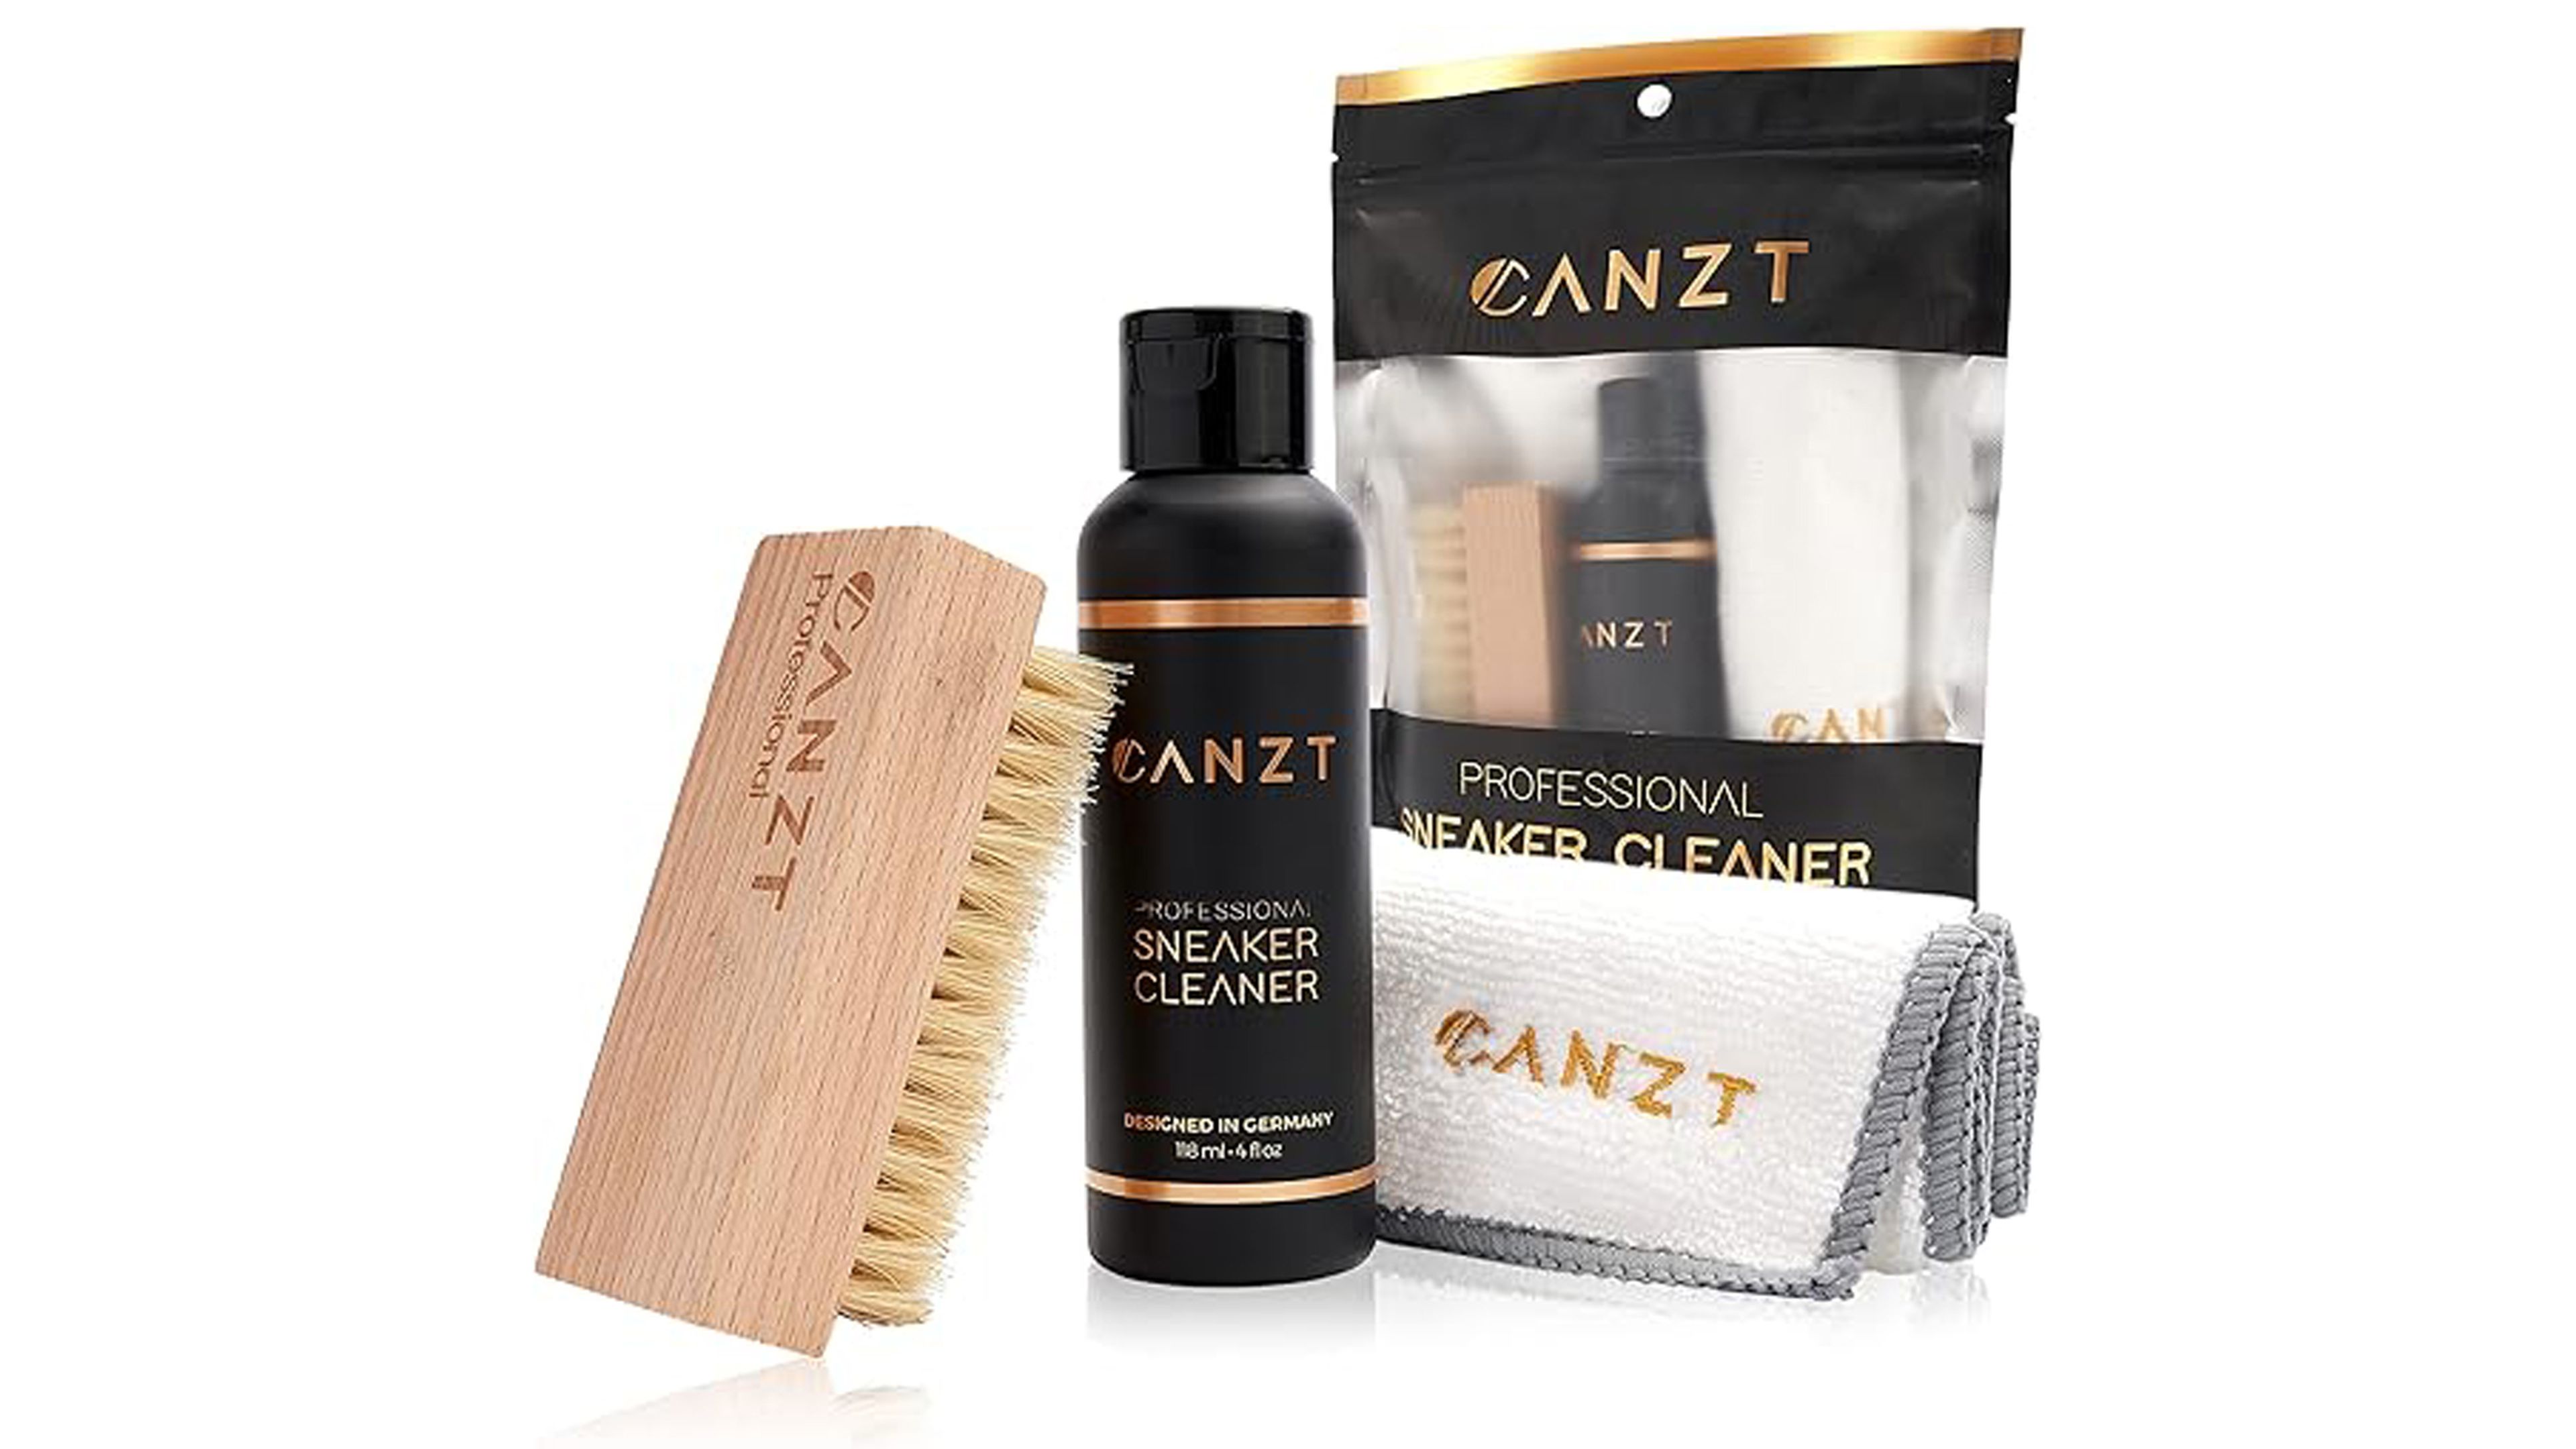 Canzt Professional Sneaker Cleaner